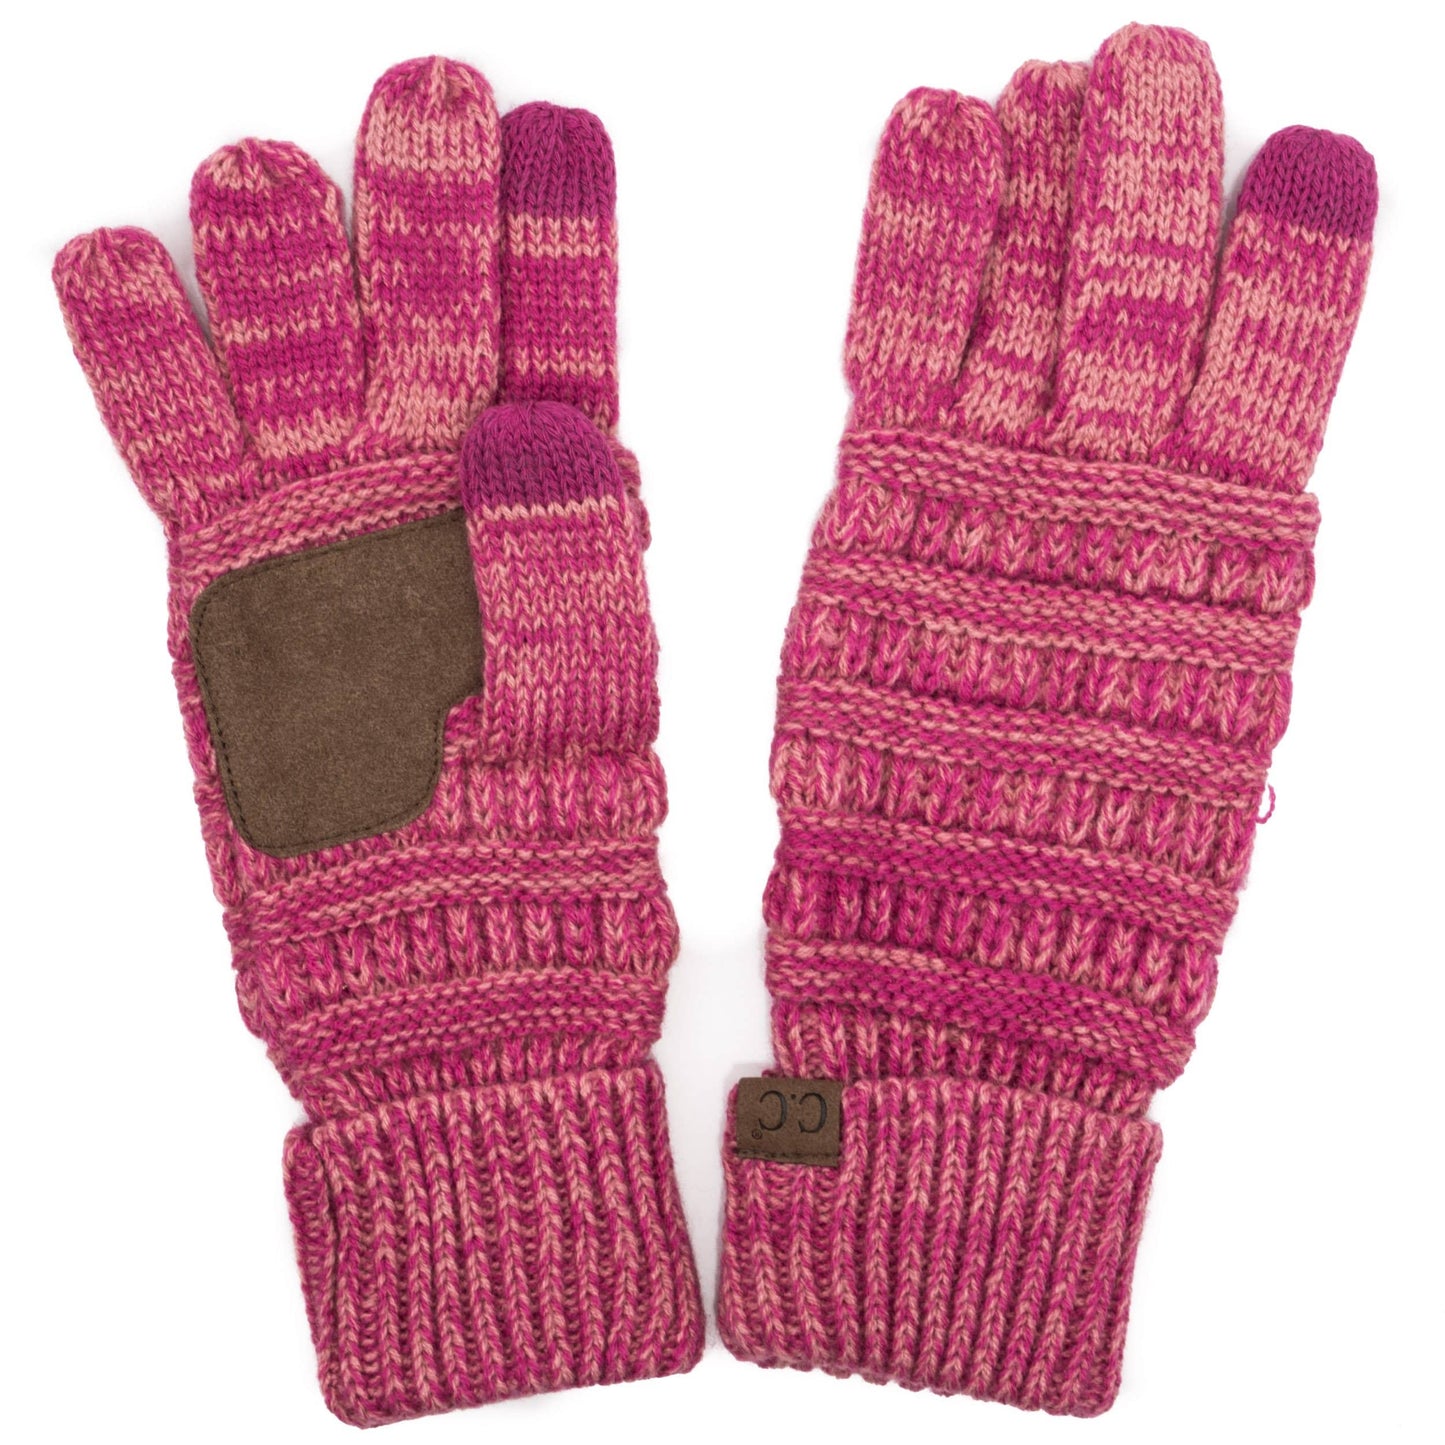 C.C Apparel Two Tone Pink C.C Unisex Cable Knit Winter Warm Anti-Slip Two-Toned Touchscreen Texting Gloves